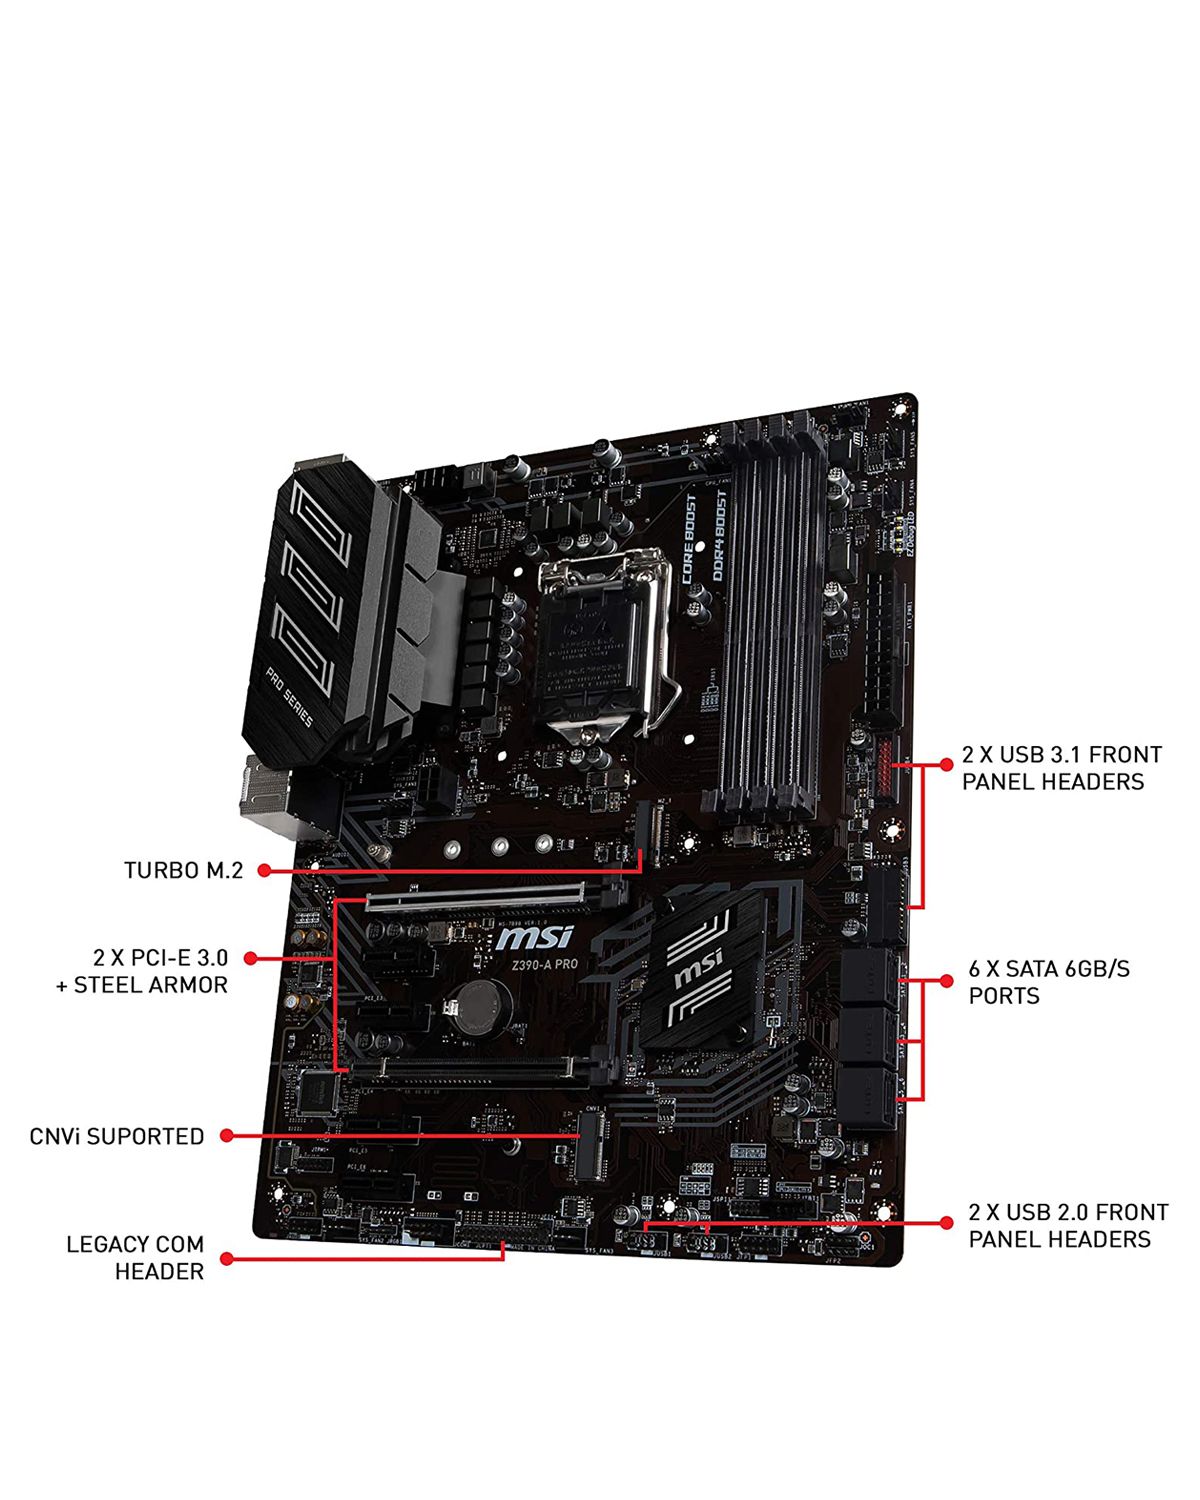 parade donor Kriminel Shop - MSI Z390-A PRO LGA1151 (Intel 8th And 9th Gen) Gaming Motherboard -  Sibbex